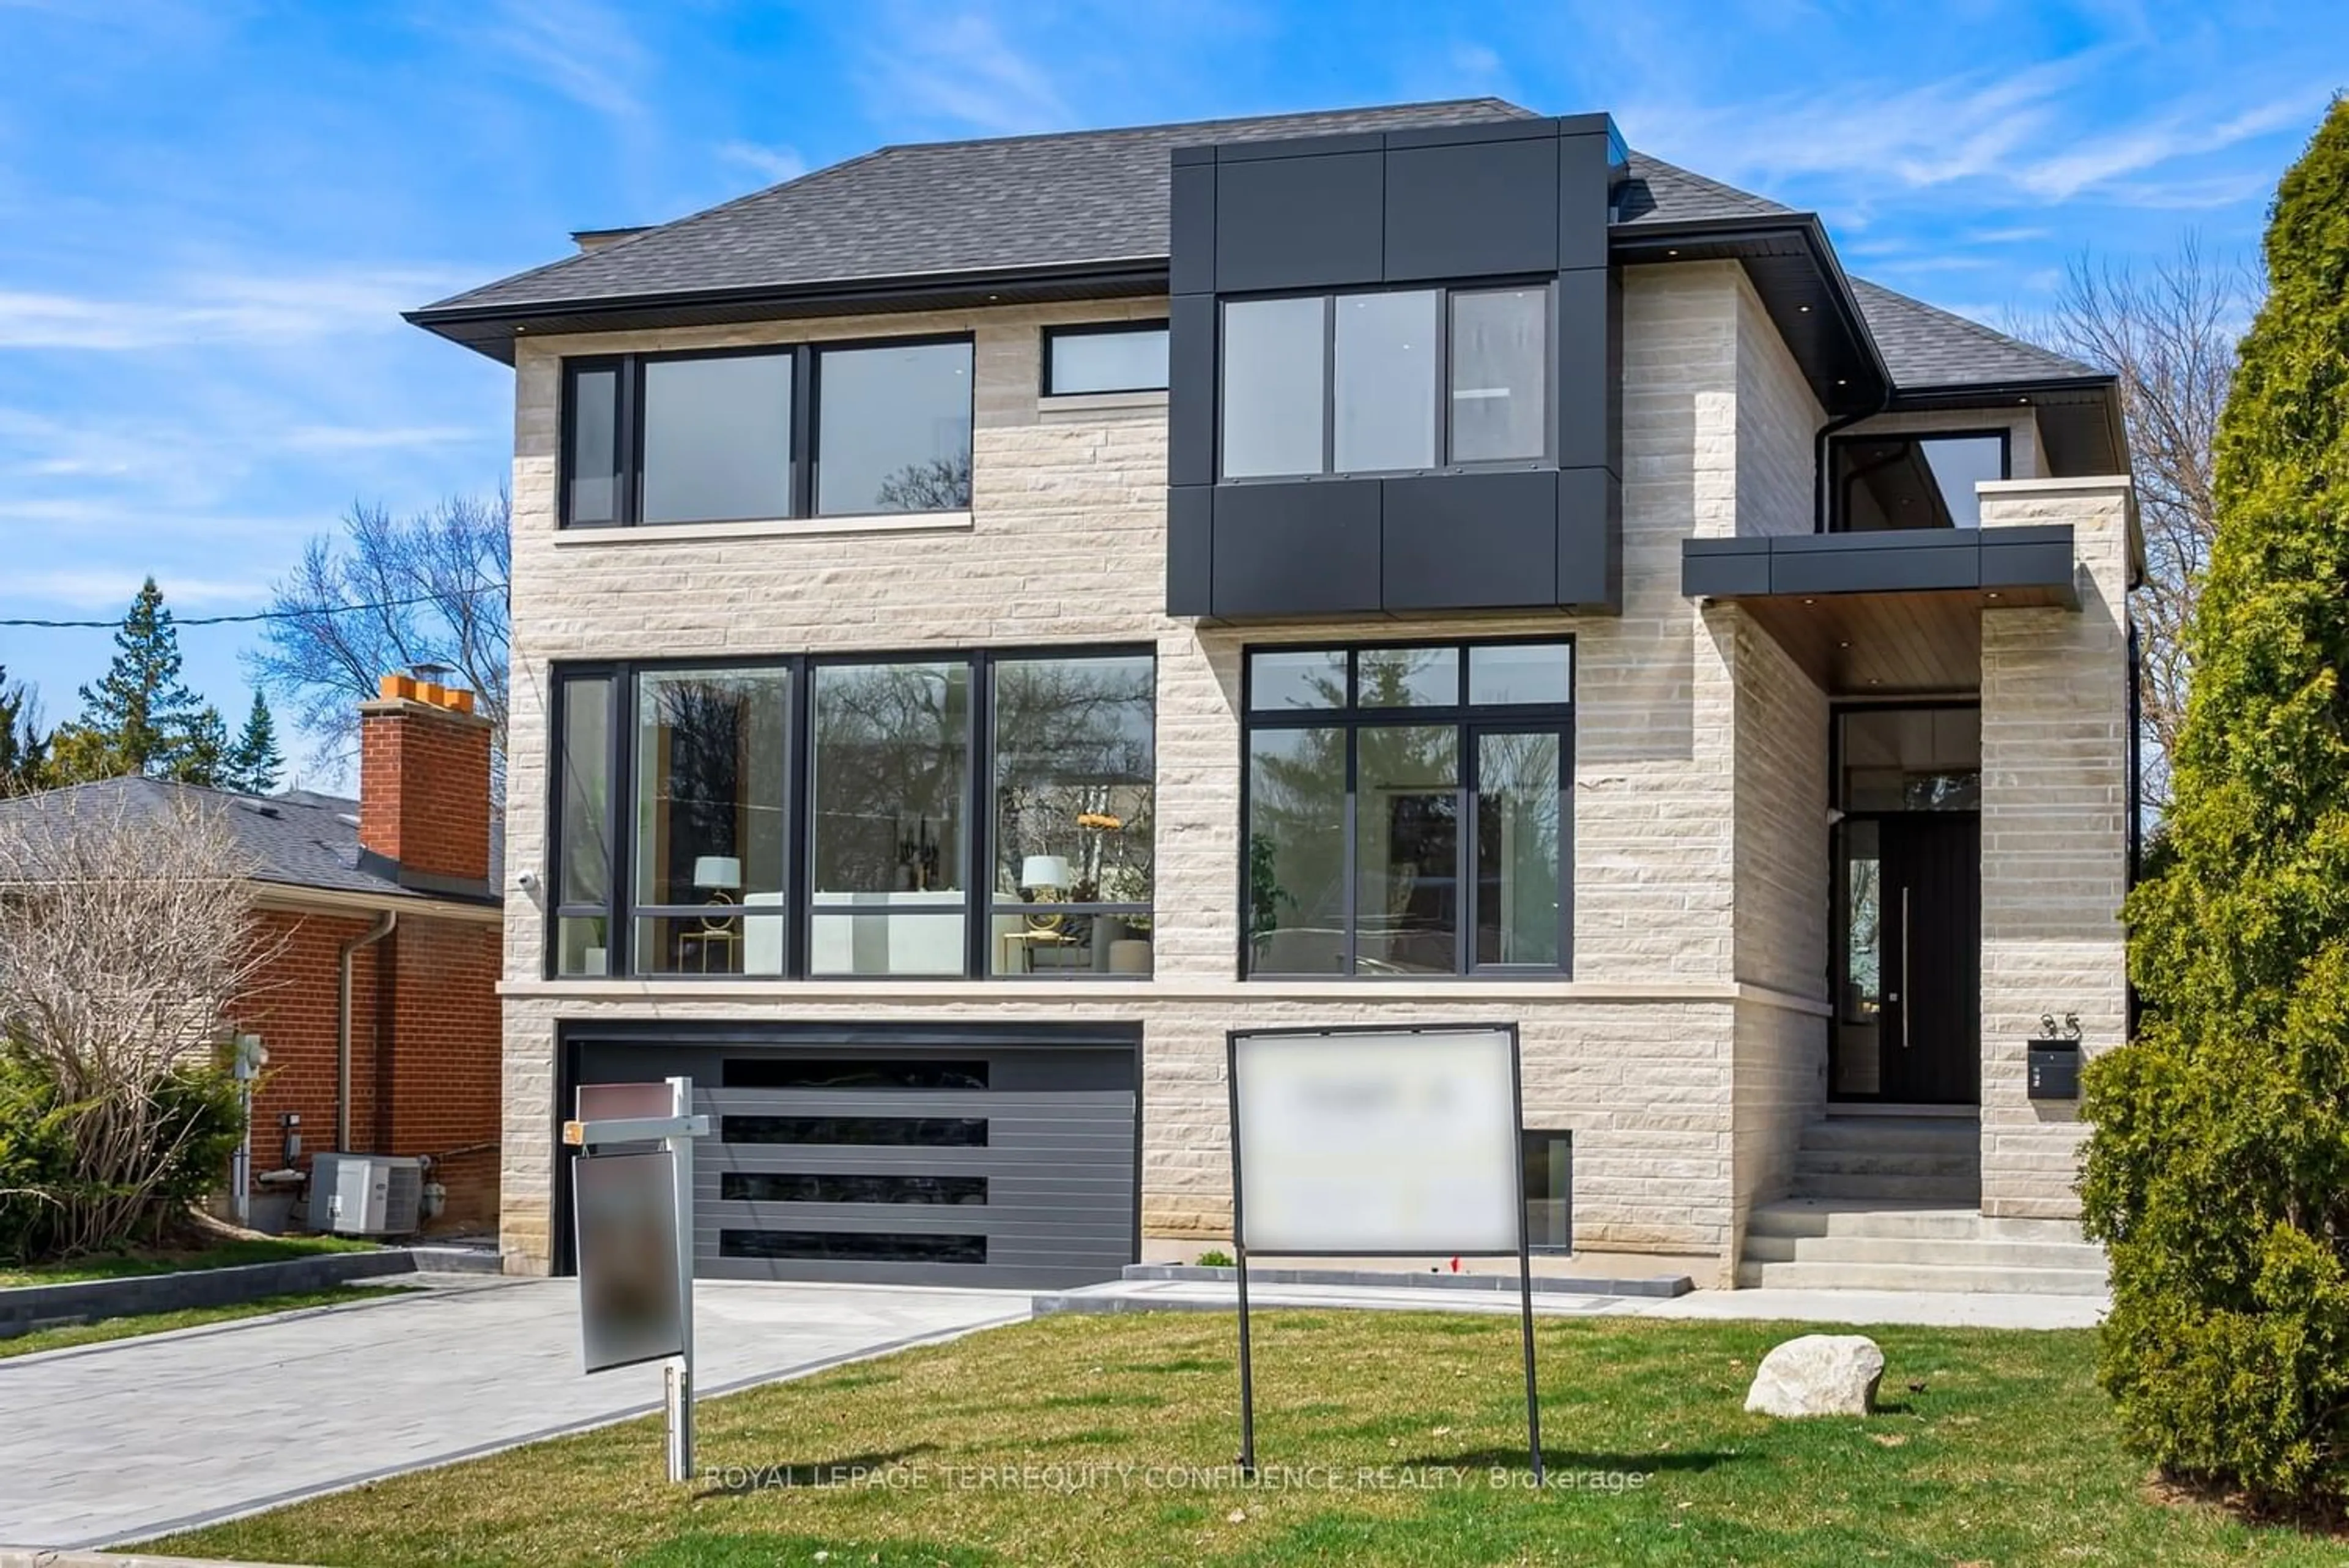 Home with brick exterior material for 35 Crossburn Dr, Toronto Ontario M3B 2Z3